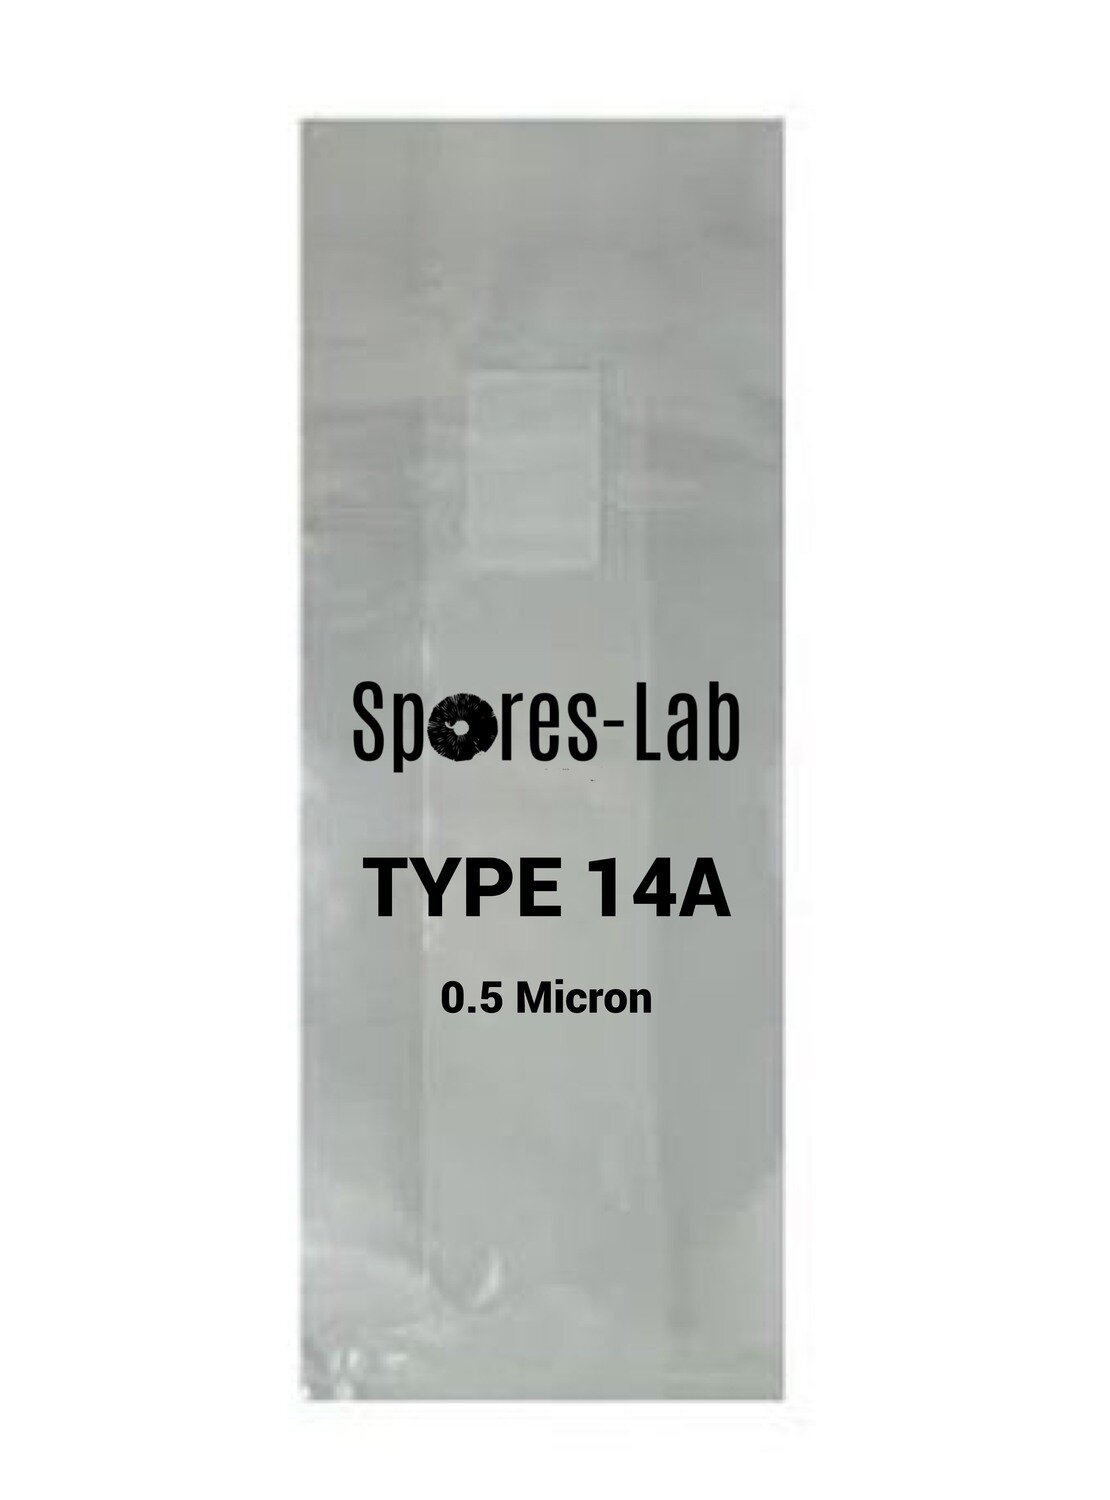 Type 14A Mushroom Substrate Bags (0.5 Micron Filter Patch)